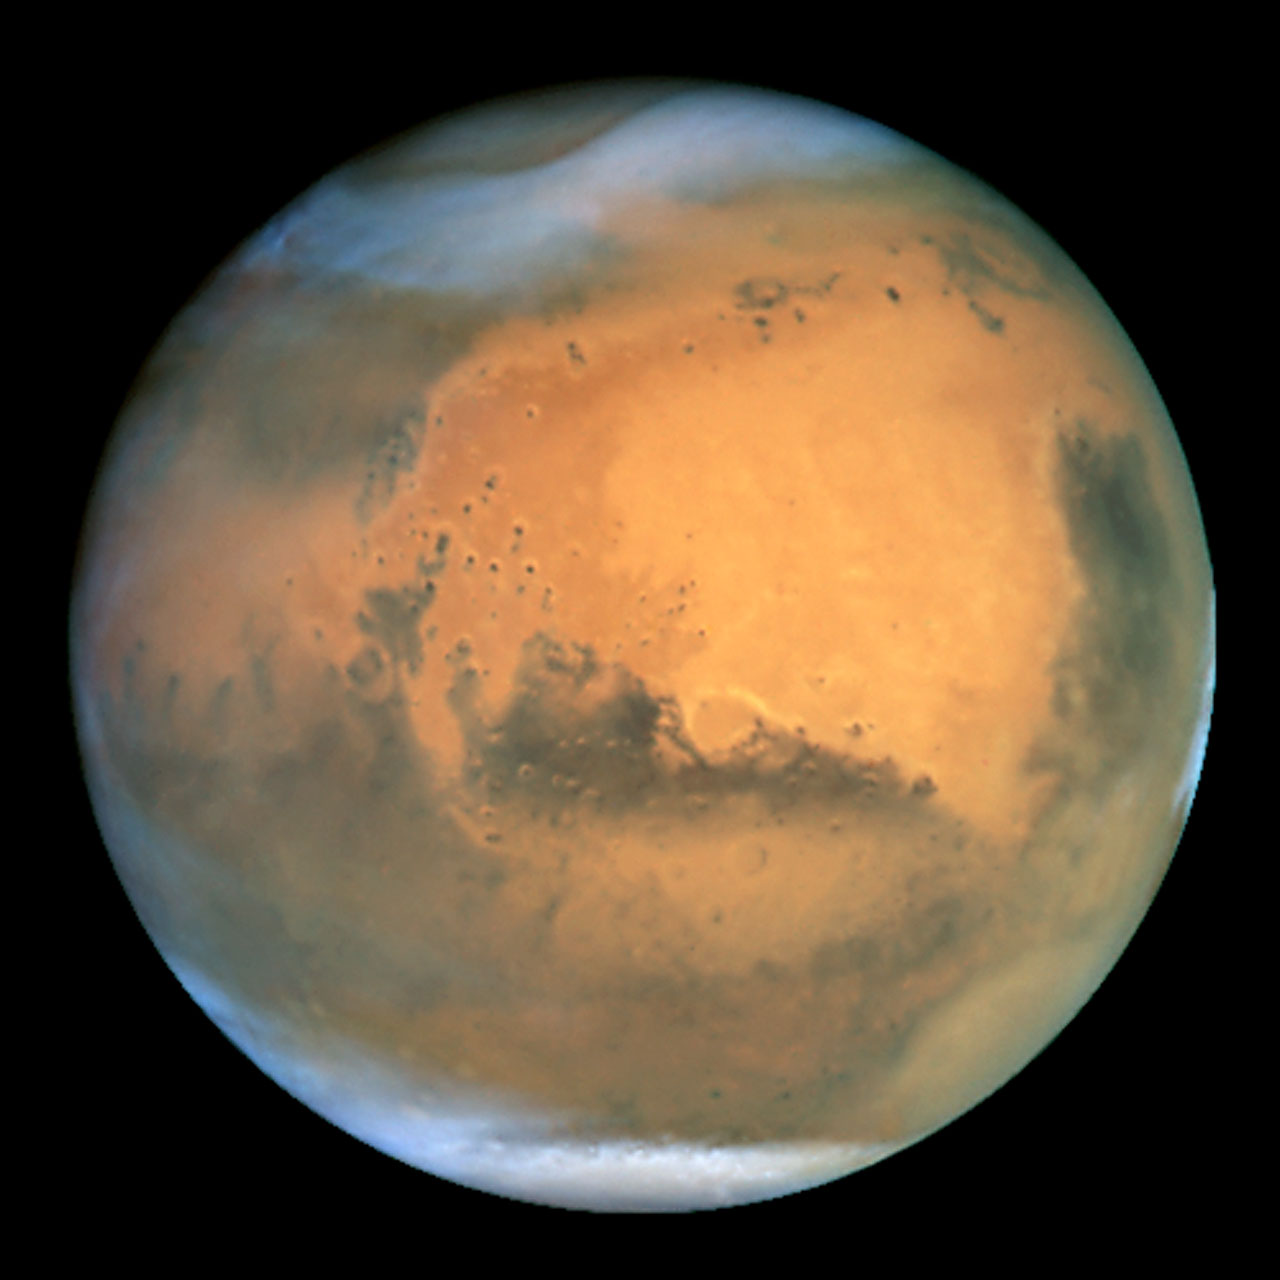 The #Mars fiction that inspires us